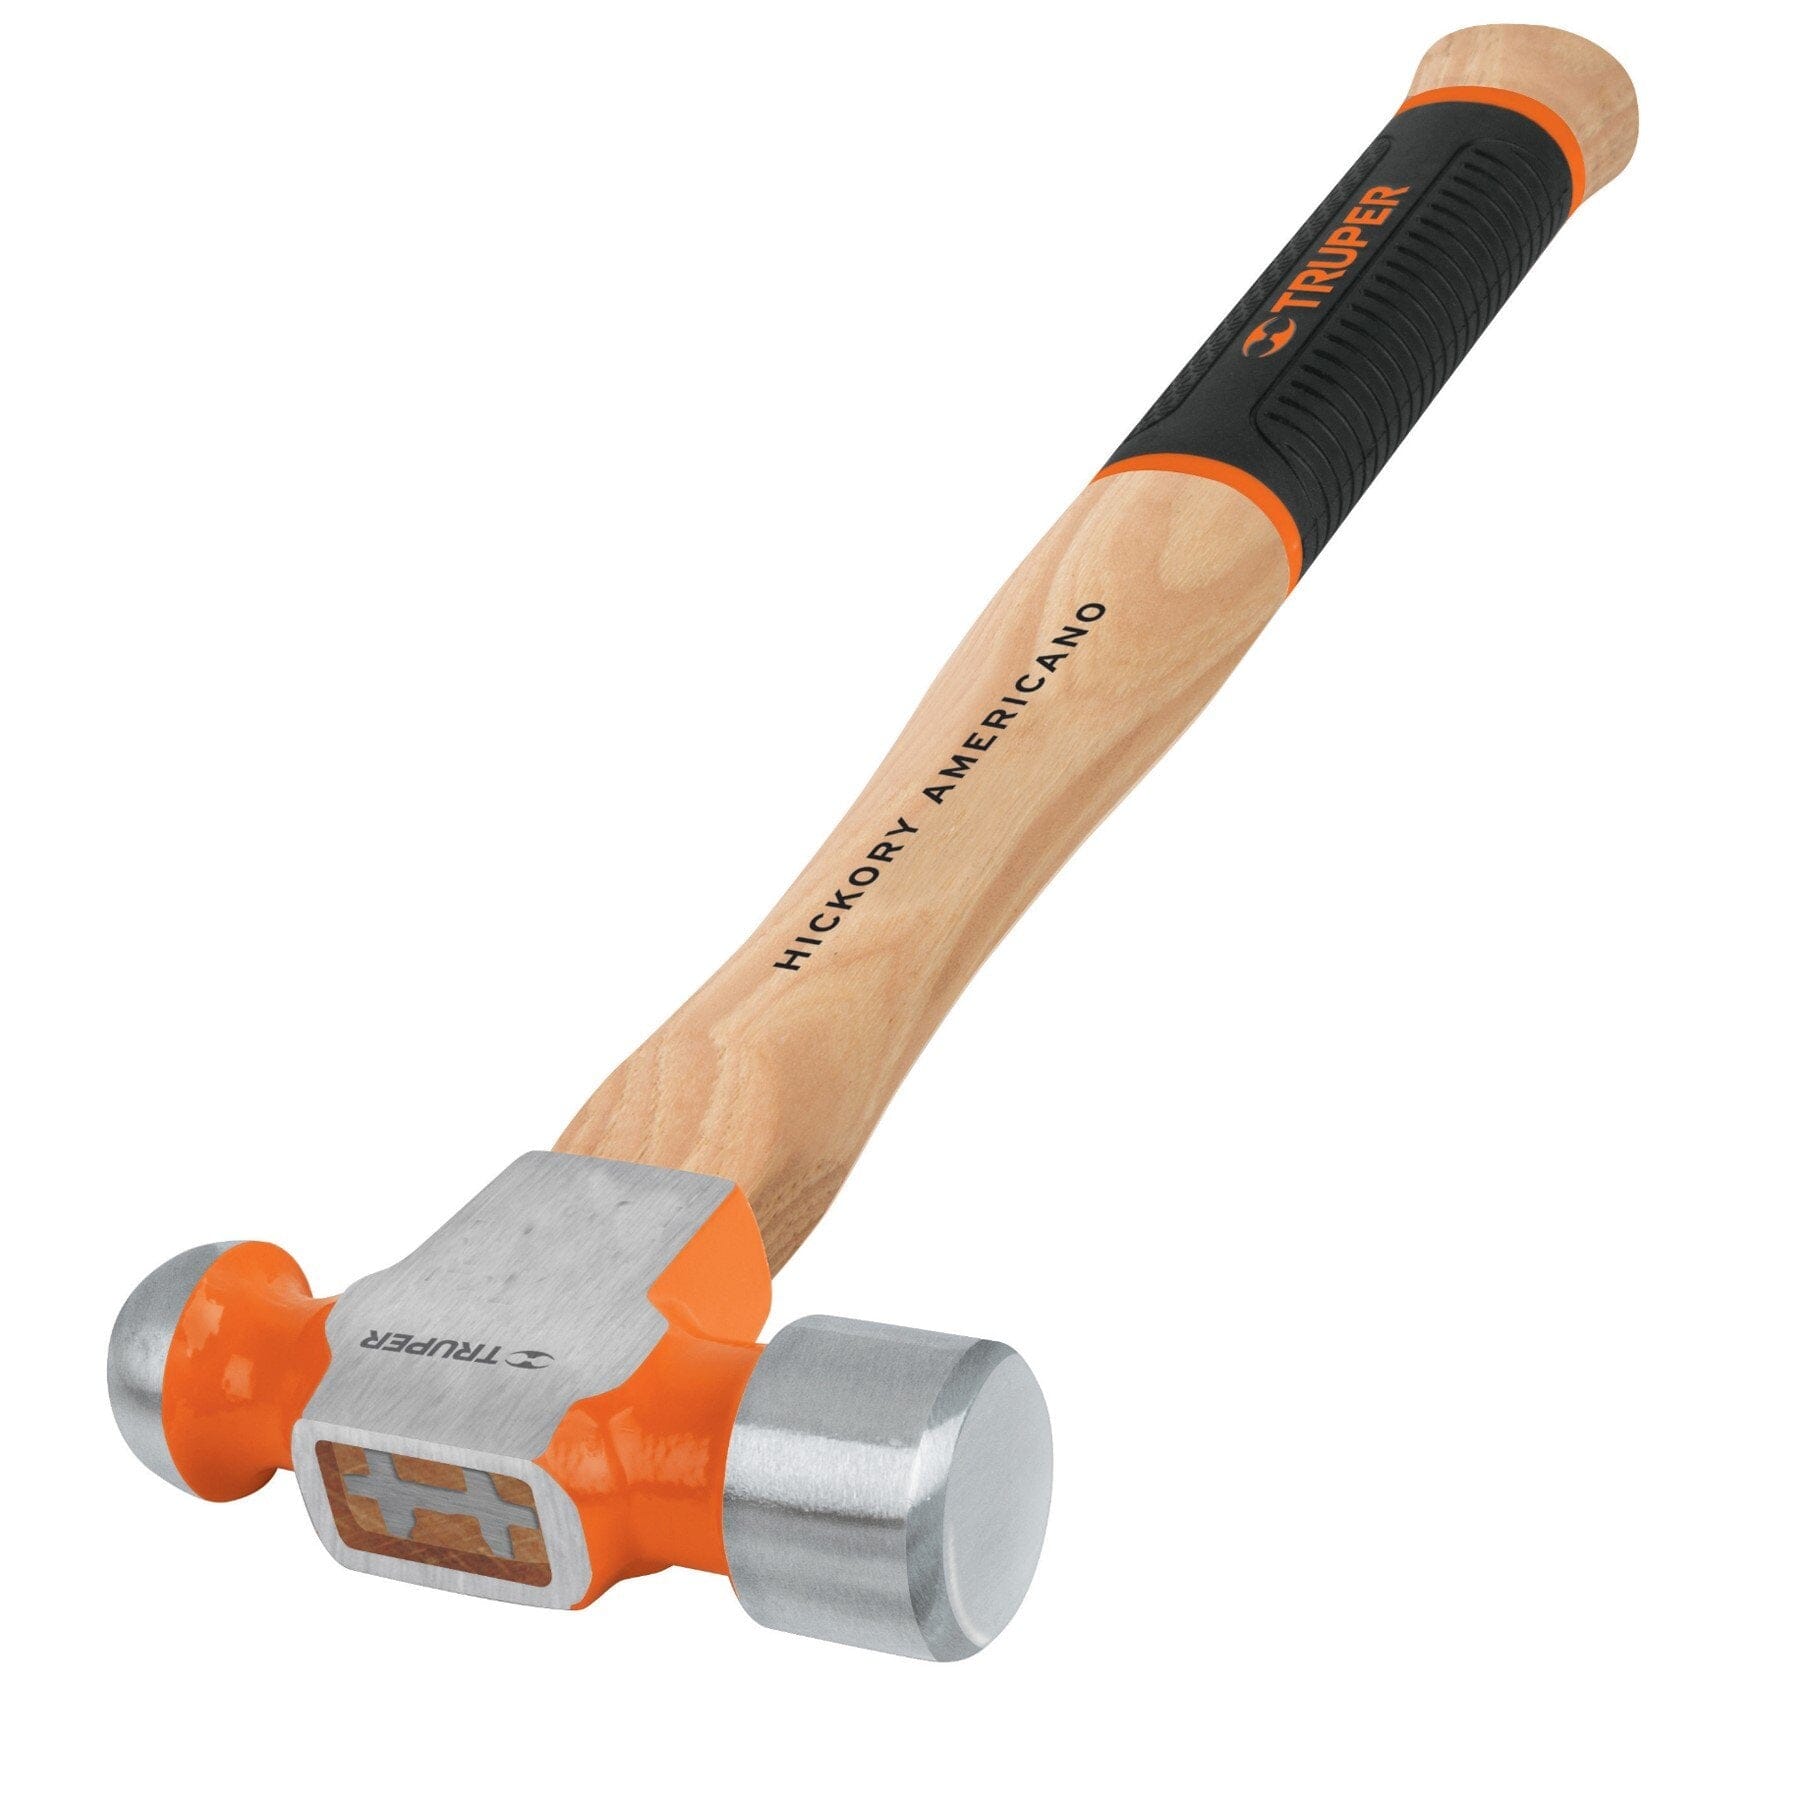 Truper Engineers Hammers Ball Pein 1LB Hickory Handle